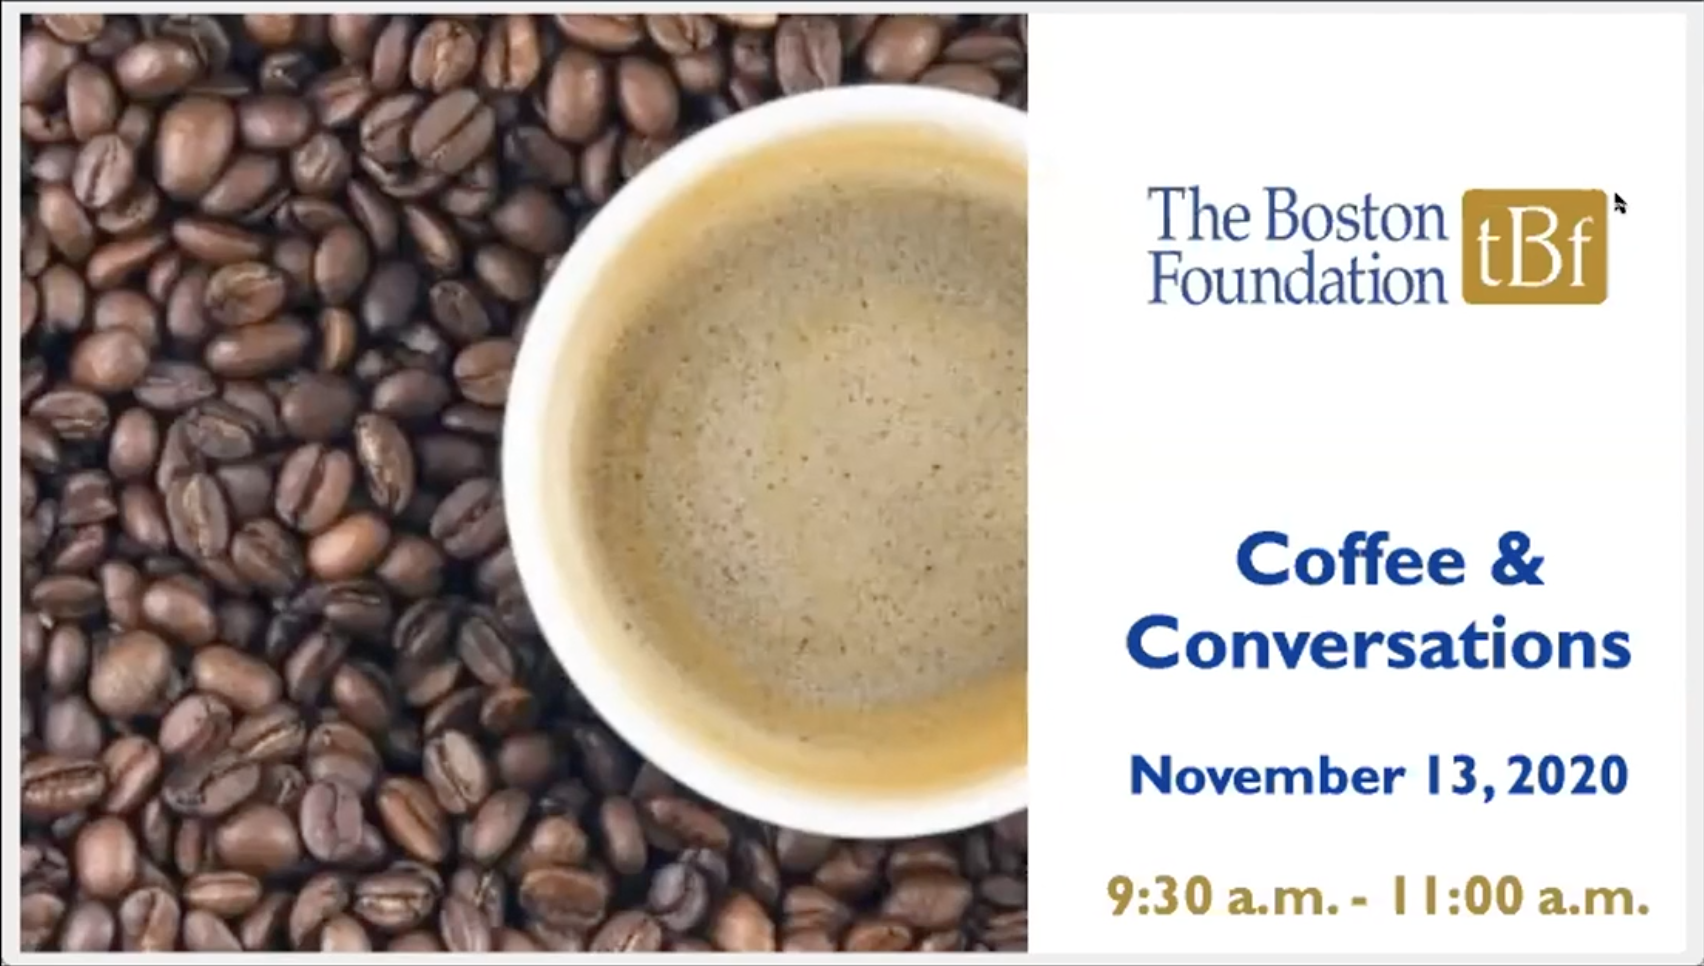 On the right, a shot of a cup of coffee from above on a bed of coffee beans. On the left, blue and gold text on a white background that says "Coffee & Conversations. November 13, 2020, 9:30am - 11:00am." TBF's logo at the top.